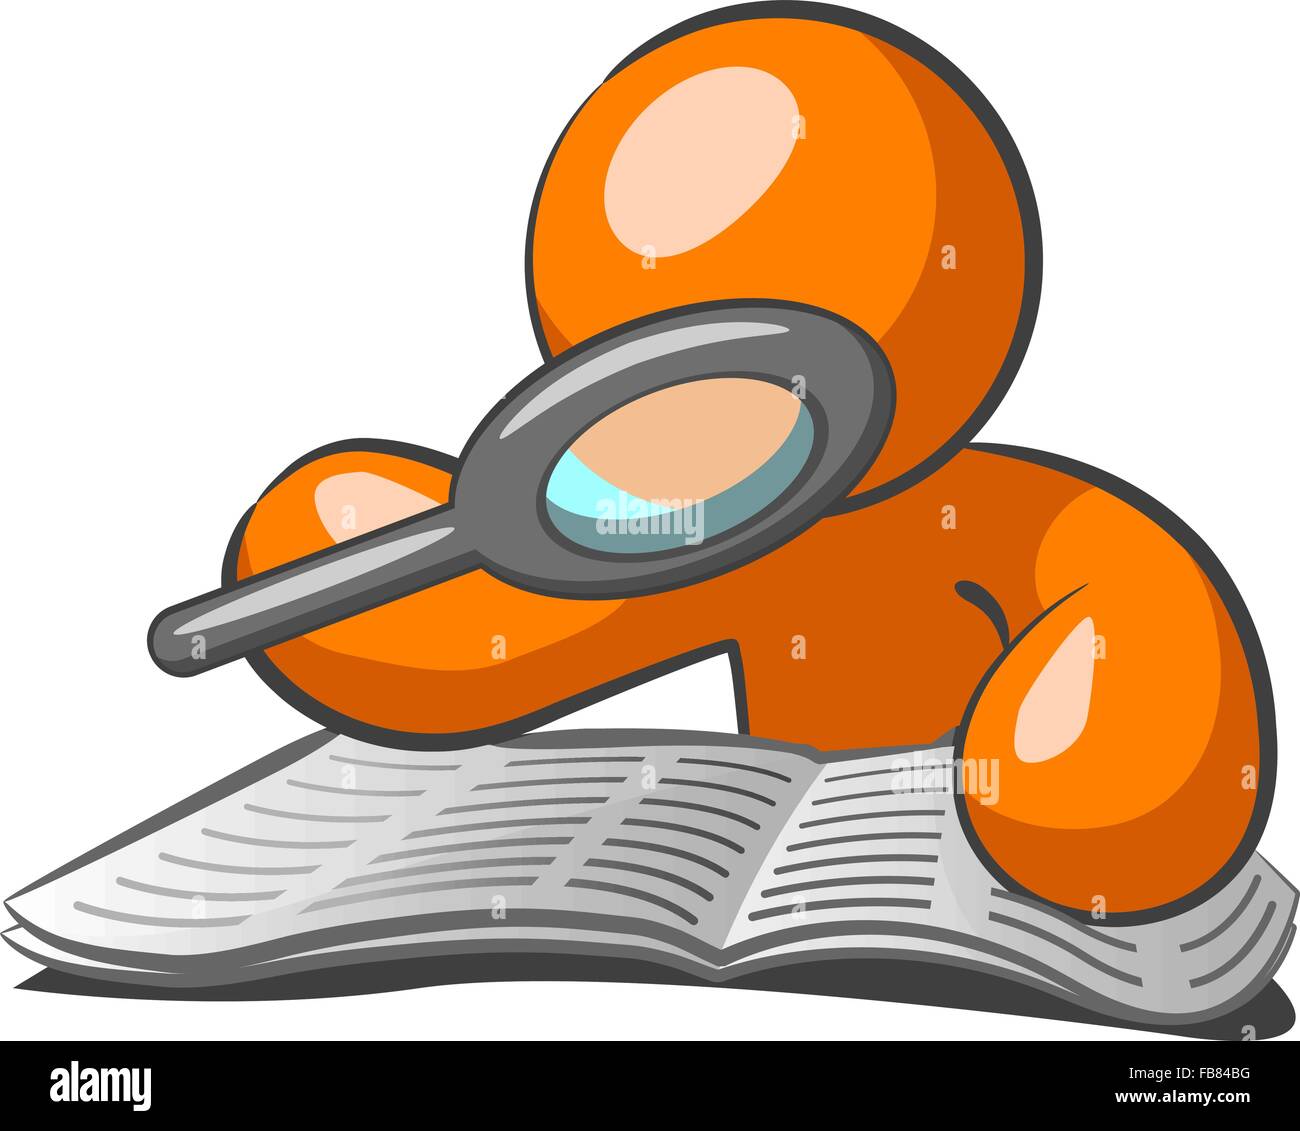 Orange man browsing the want ads, looking for a job in this very challenged economy. He's using a magnifying glass!. Stock Vector